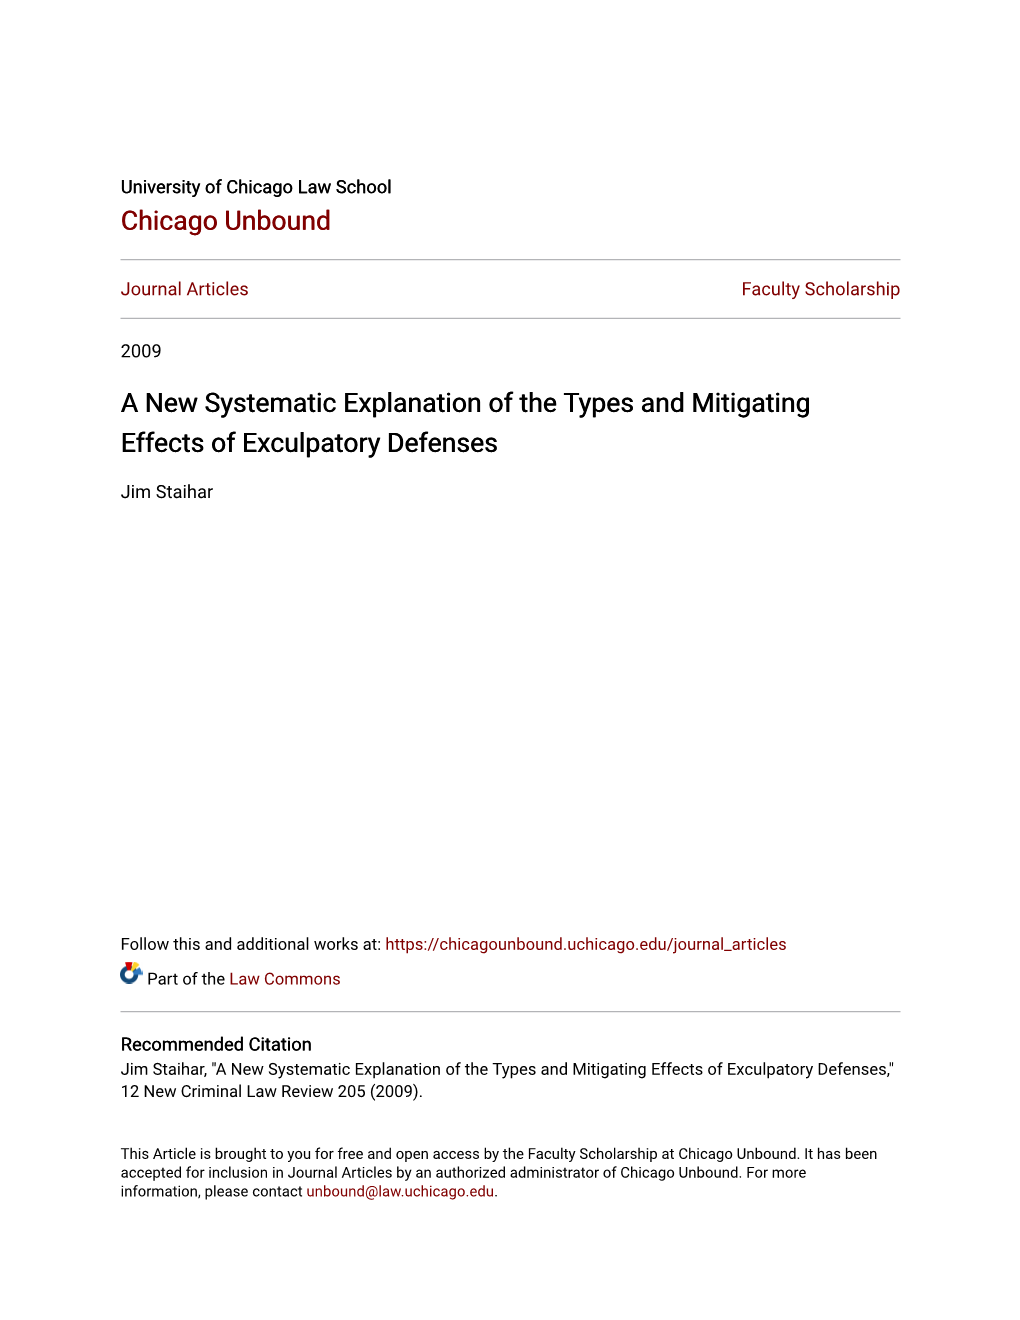 A New Systematic Explanation of the Types and Mitigating Effects of Exculpatory Defenses